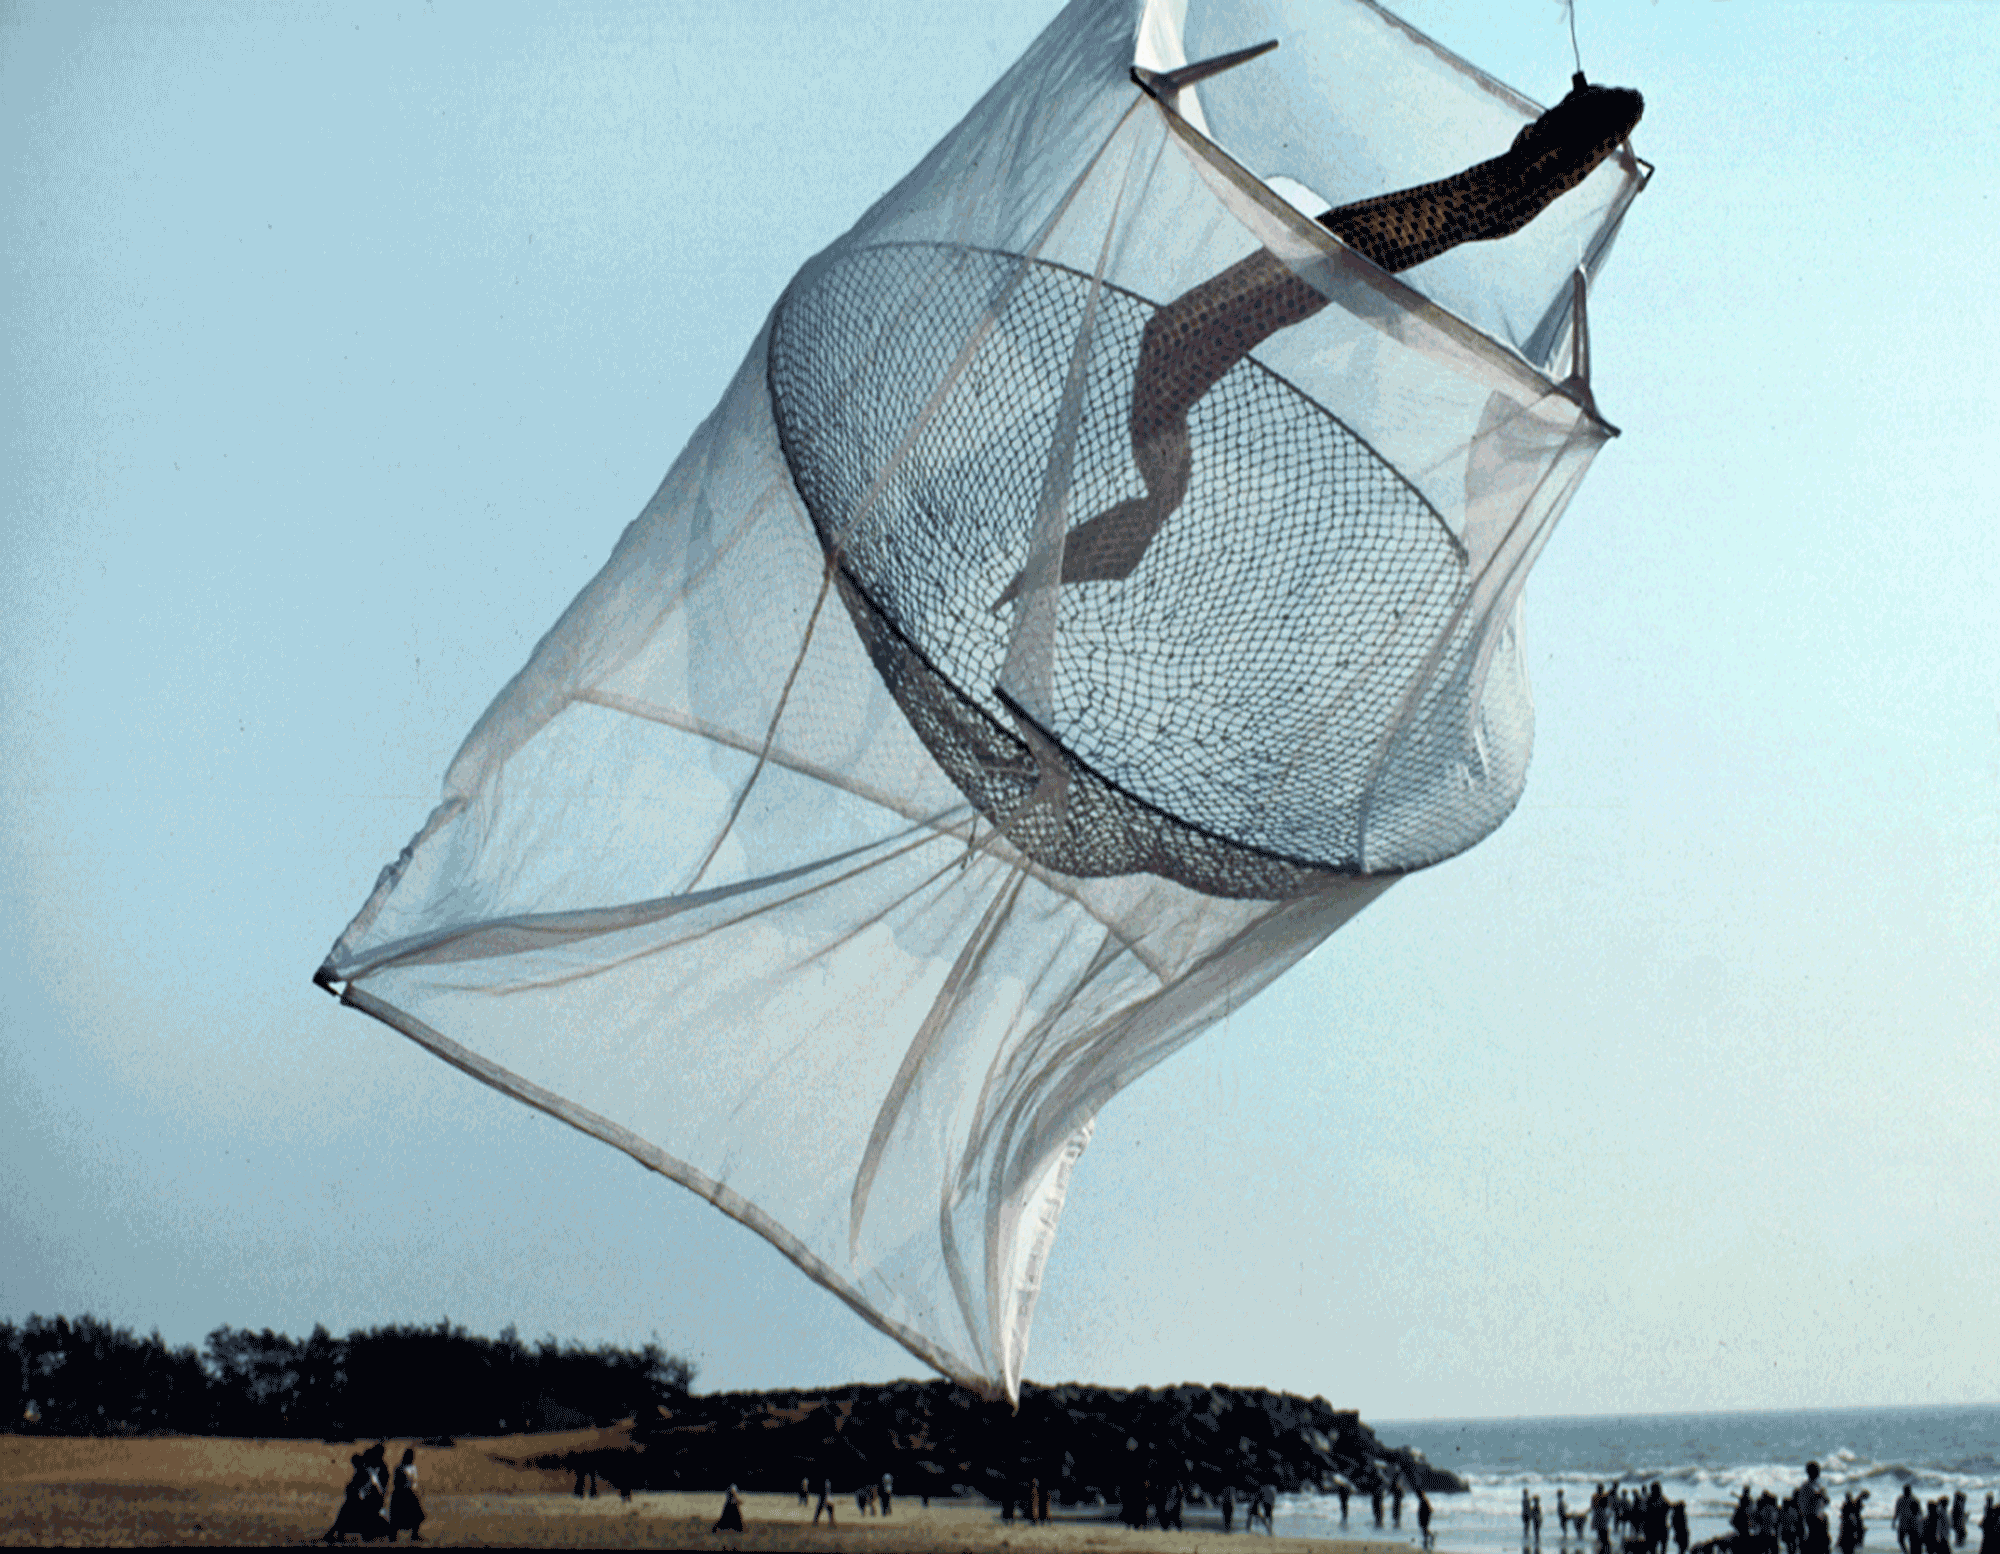 Gallery: Fantastical floating sculptures that will send your mind soaring